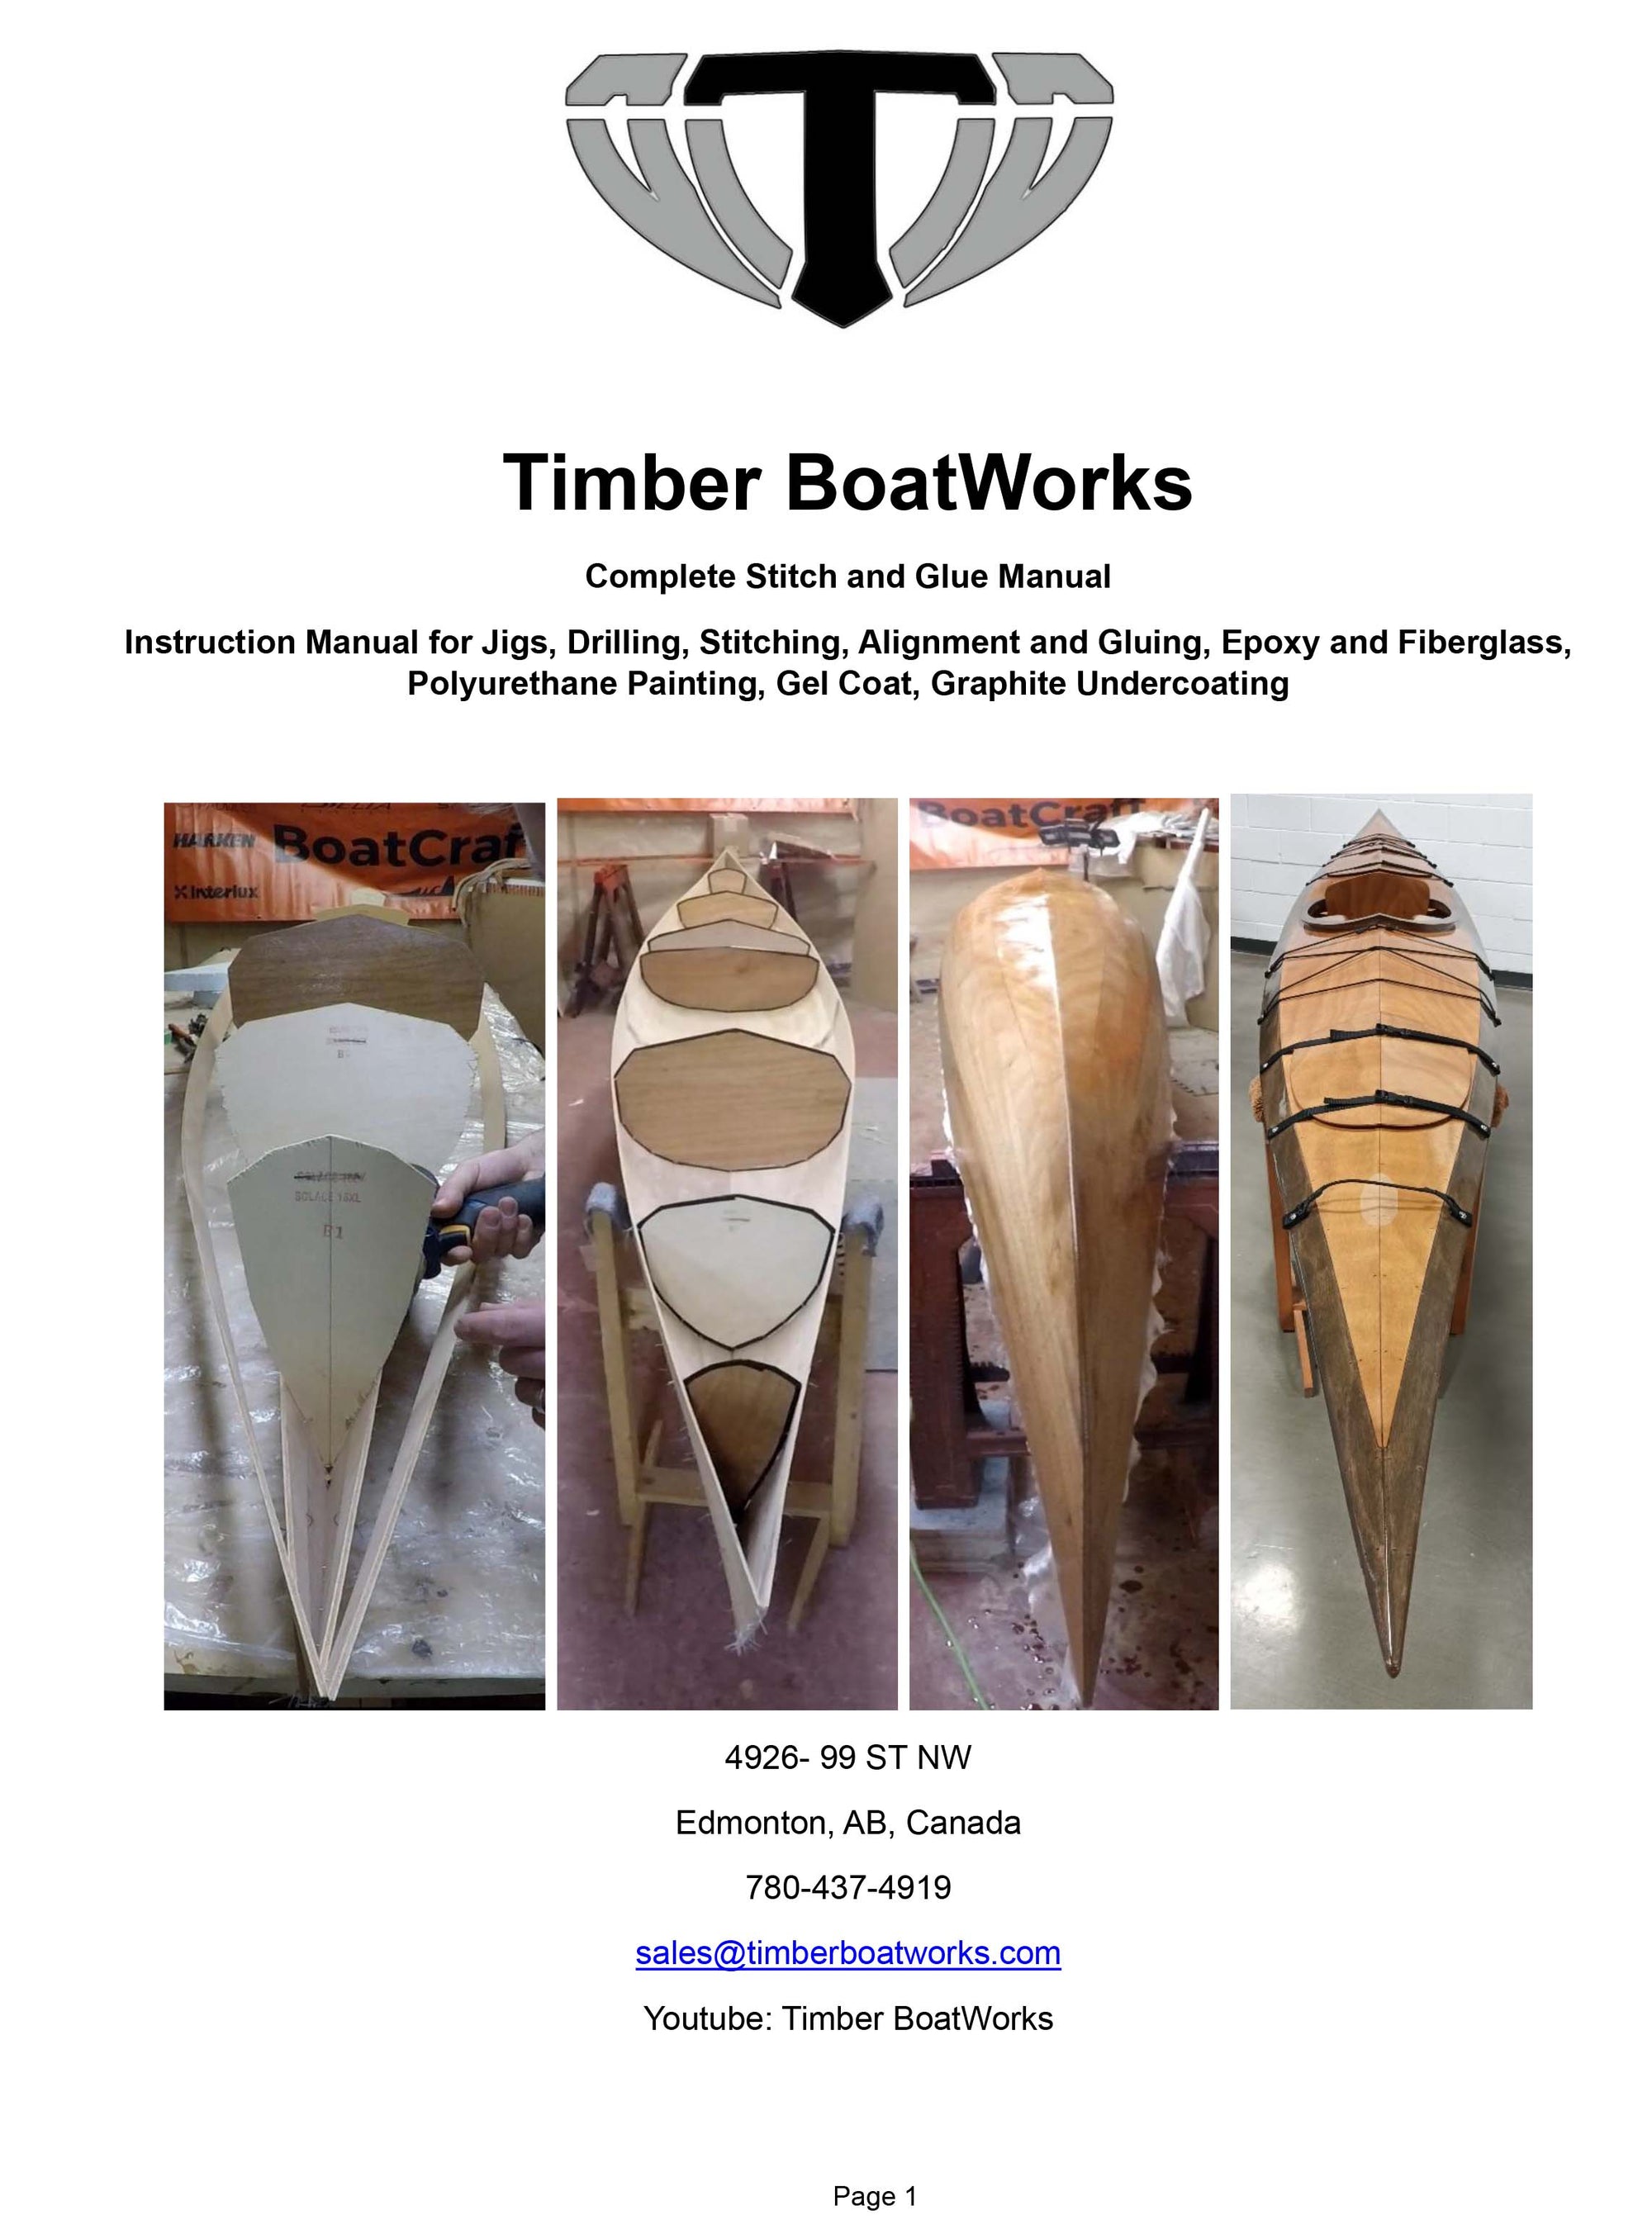 Timber Boatworks Complete Stitch and Glue Manual